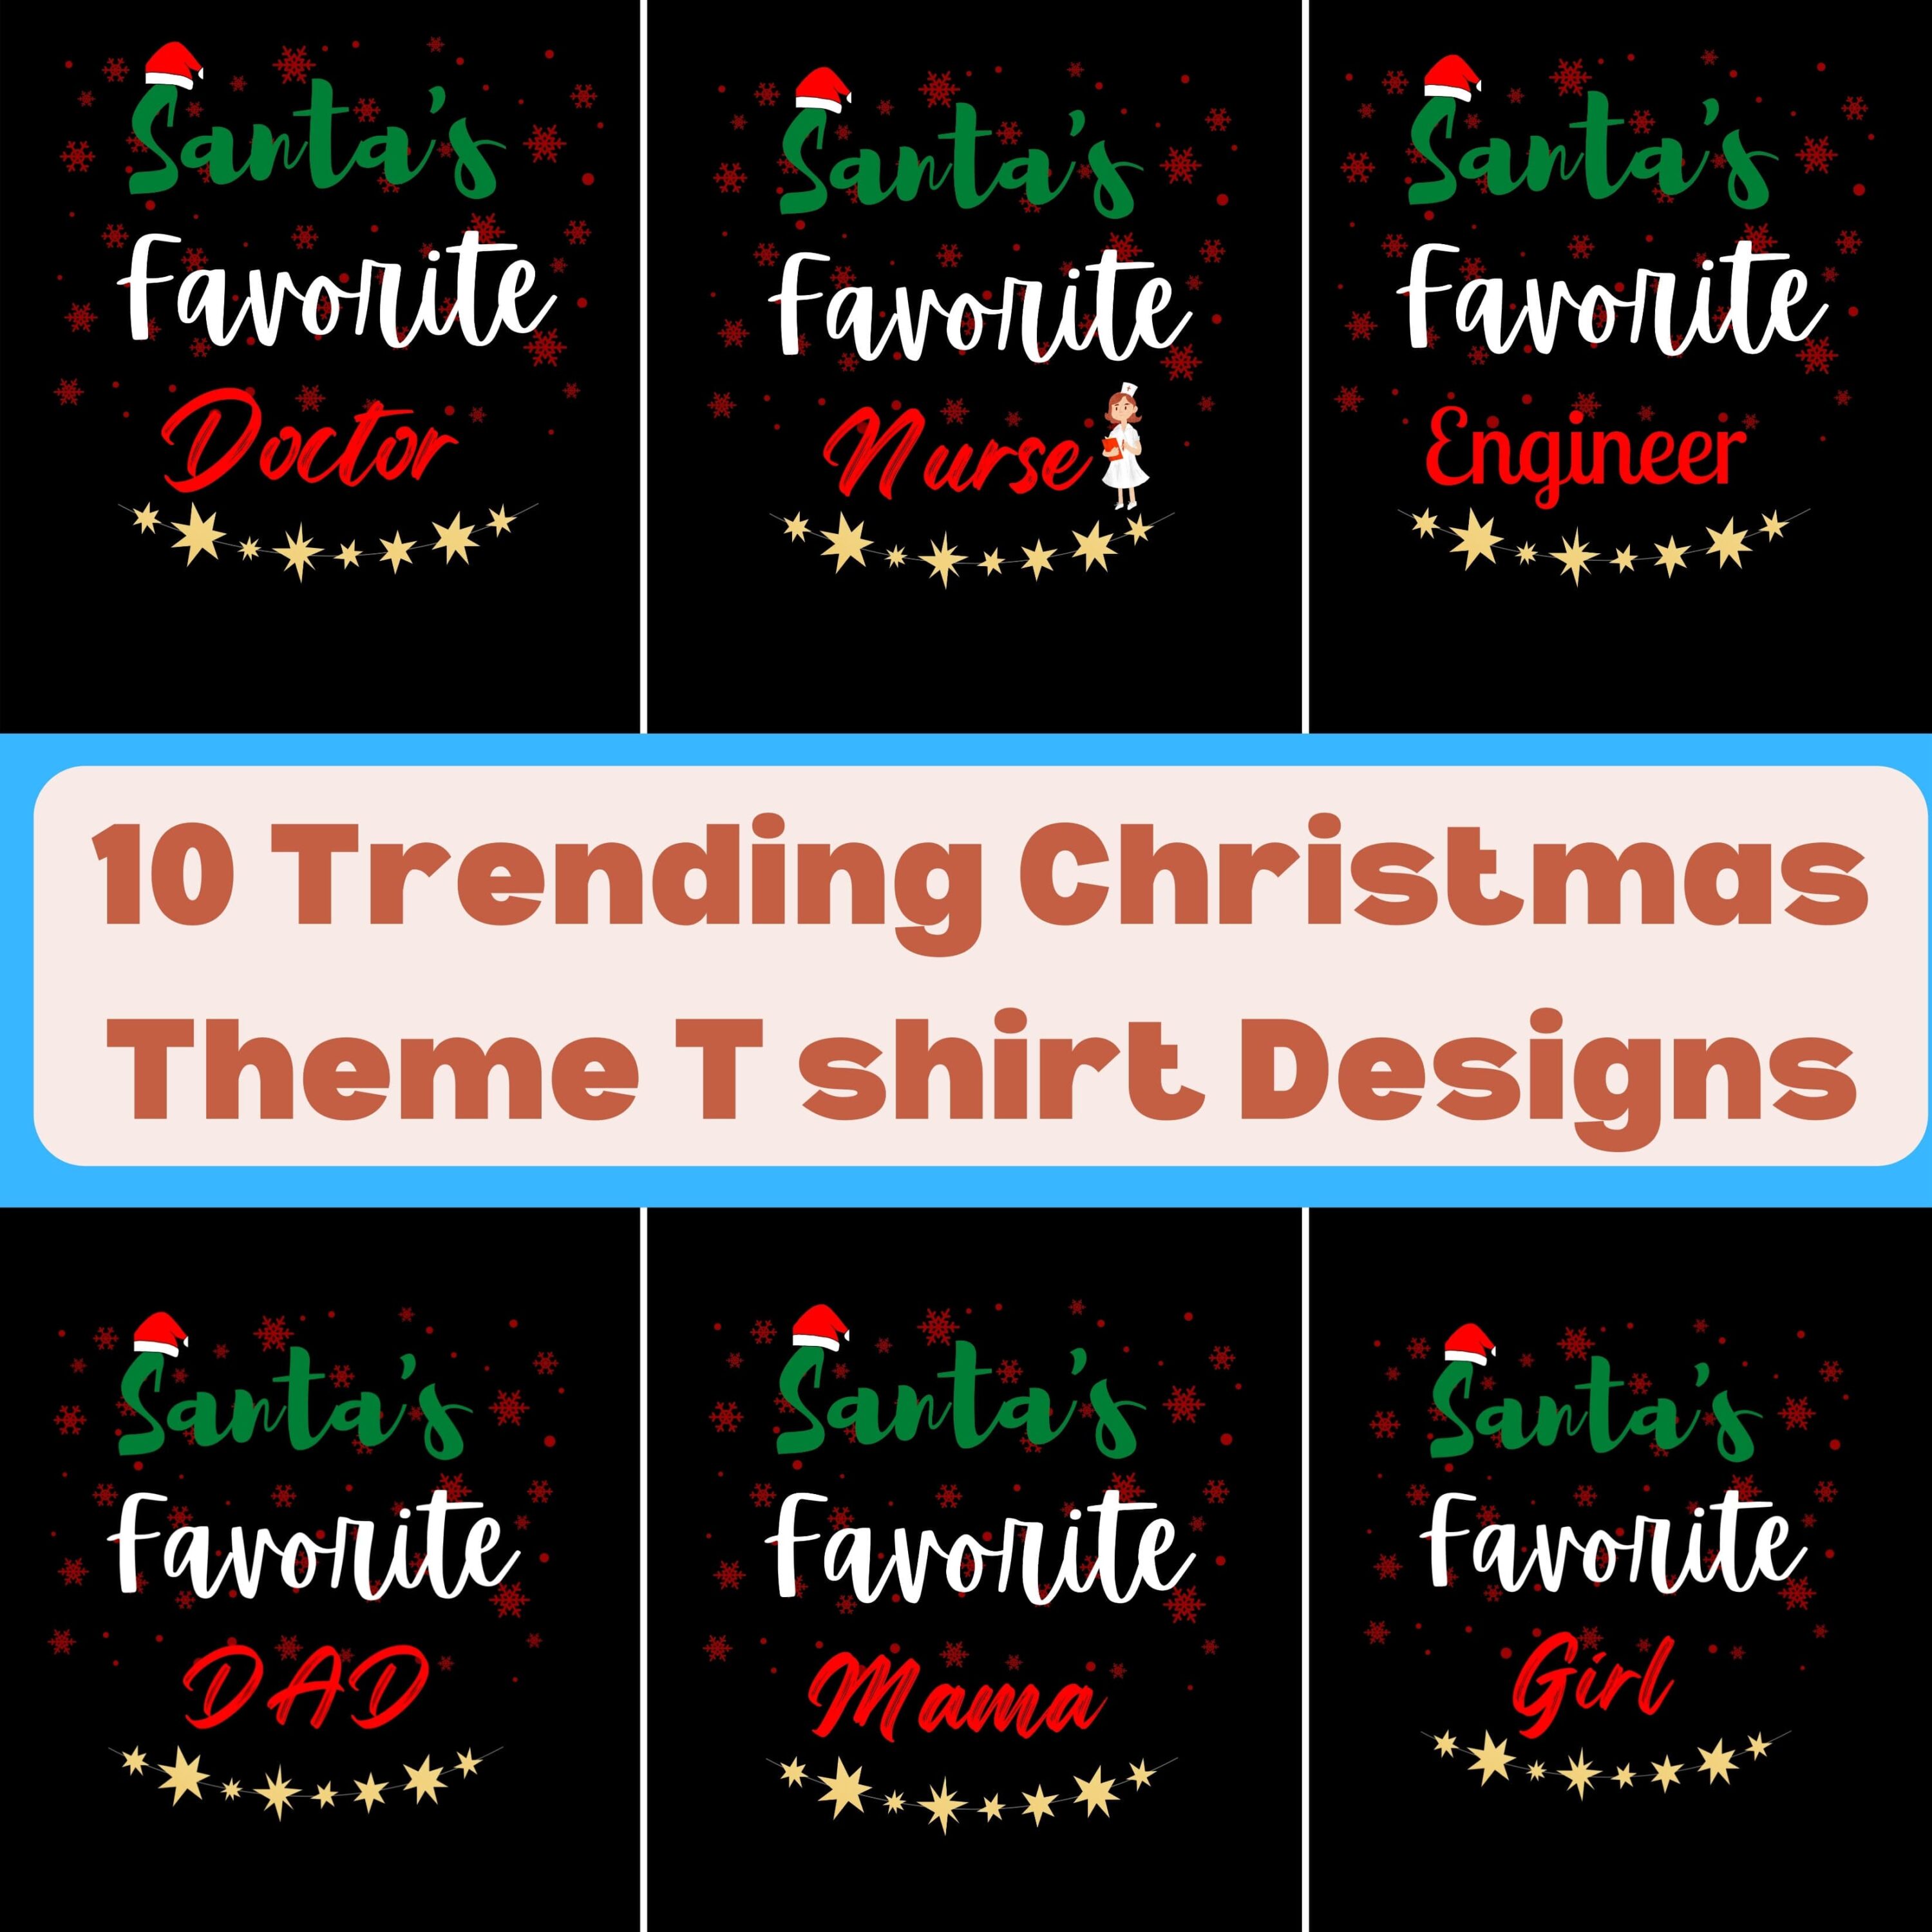 Trending And Evergreen Christmas T-shirt Designs cover image.